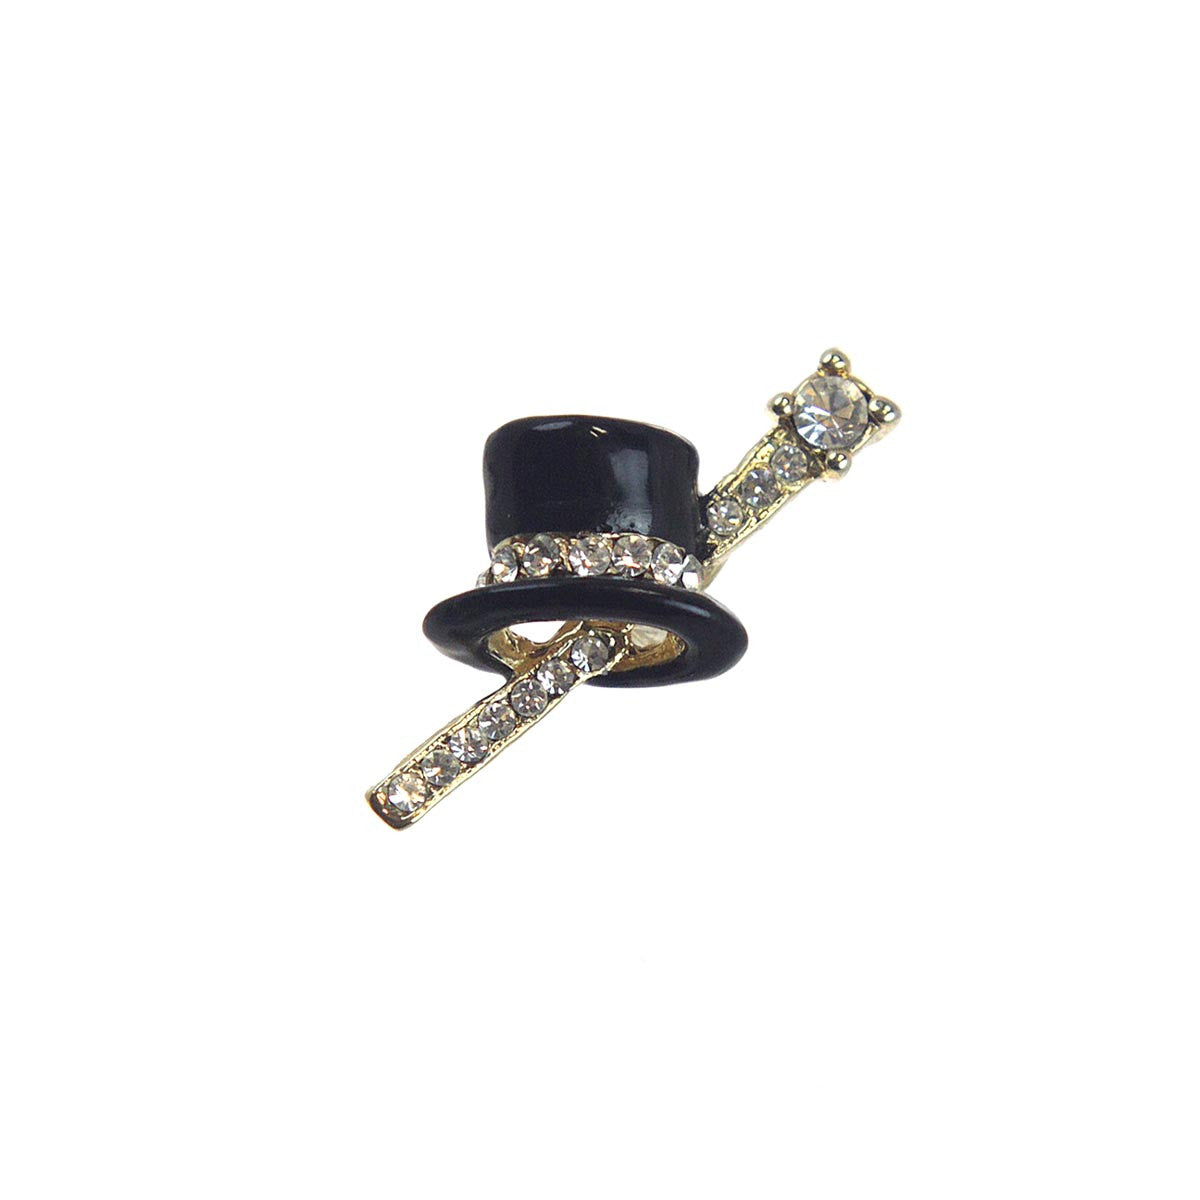 Top Hat with Cane Black